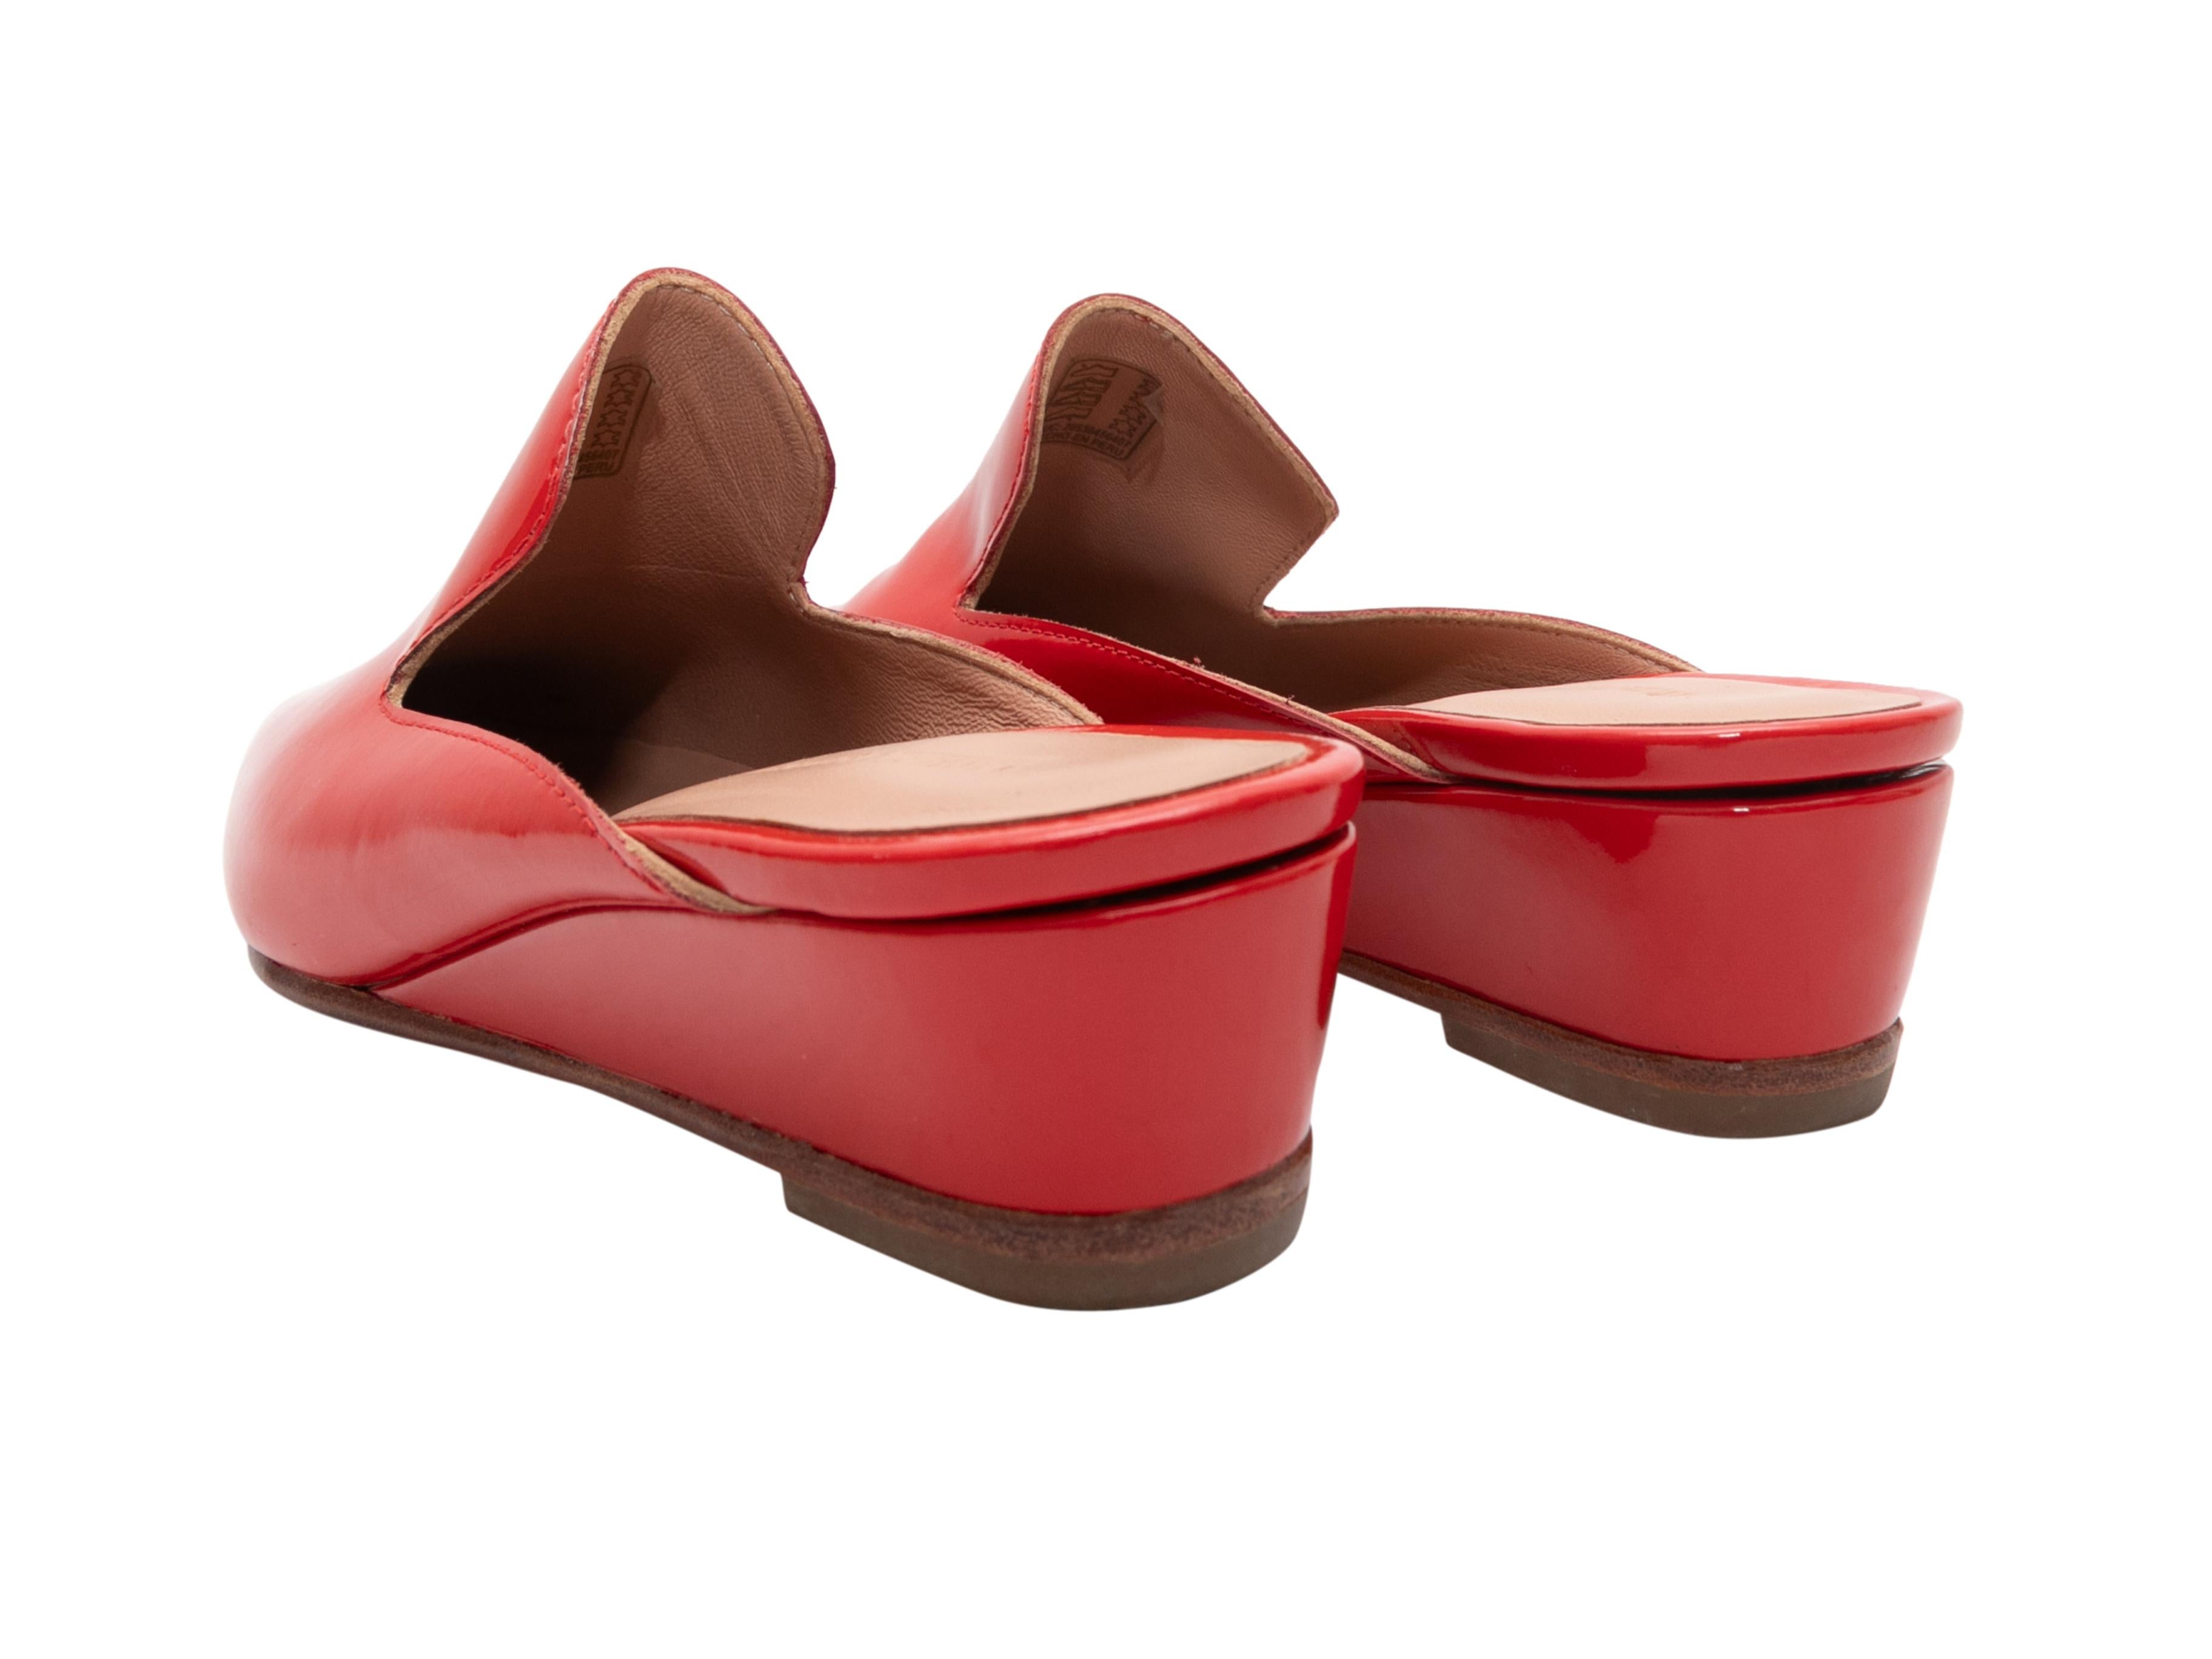 Red Rachel Comey Patent Wedge Mules Size 37 1